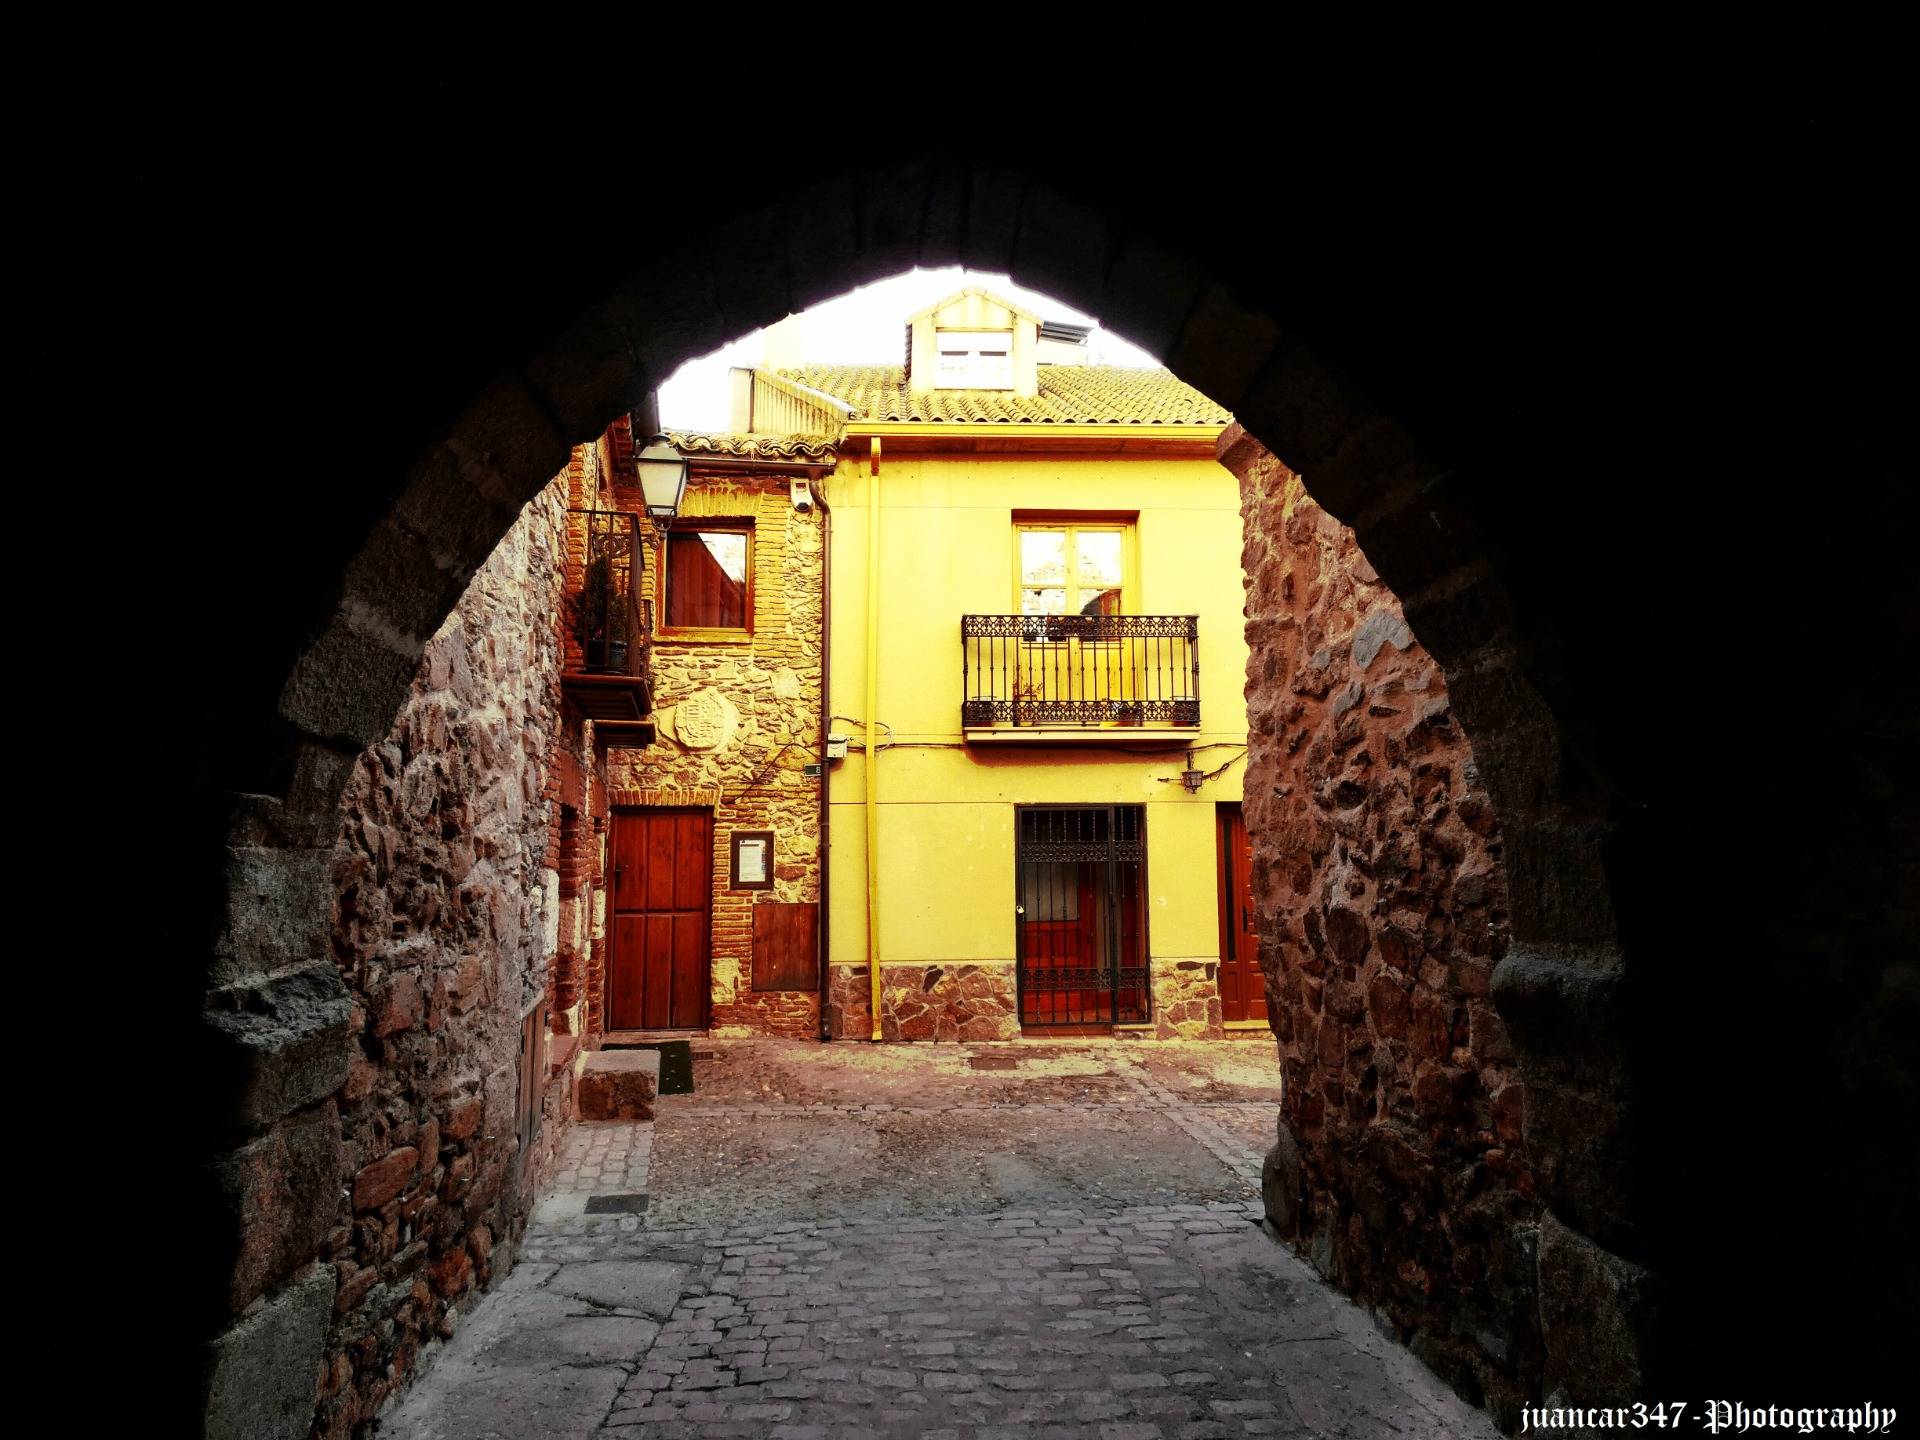 The medieval arch hides a golden vision